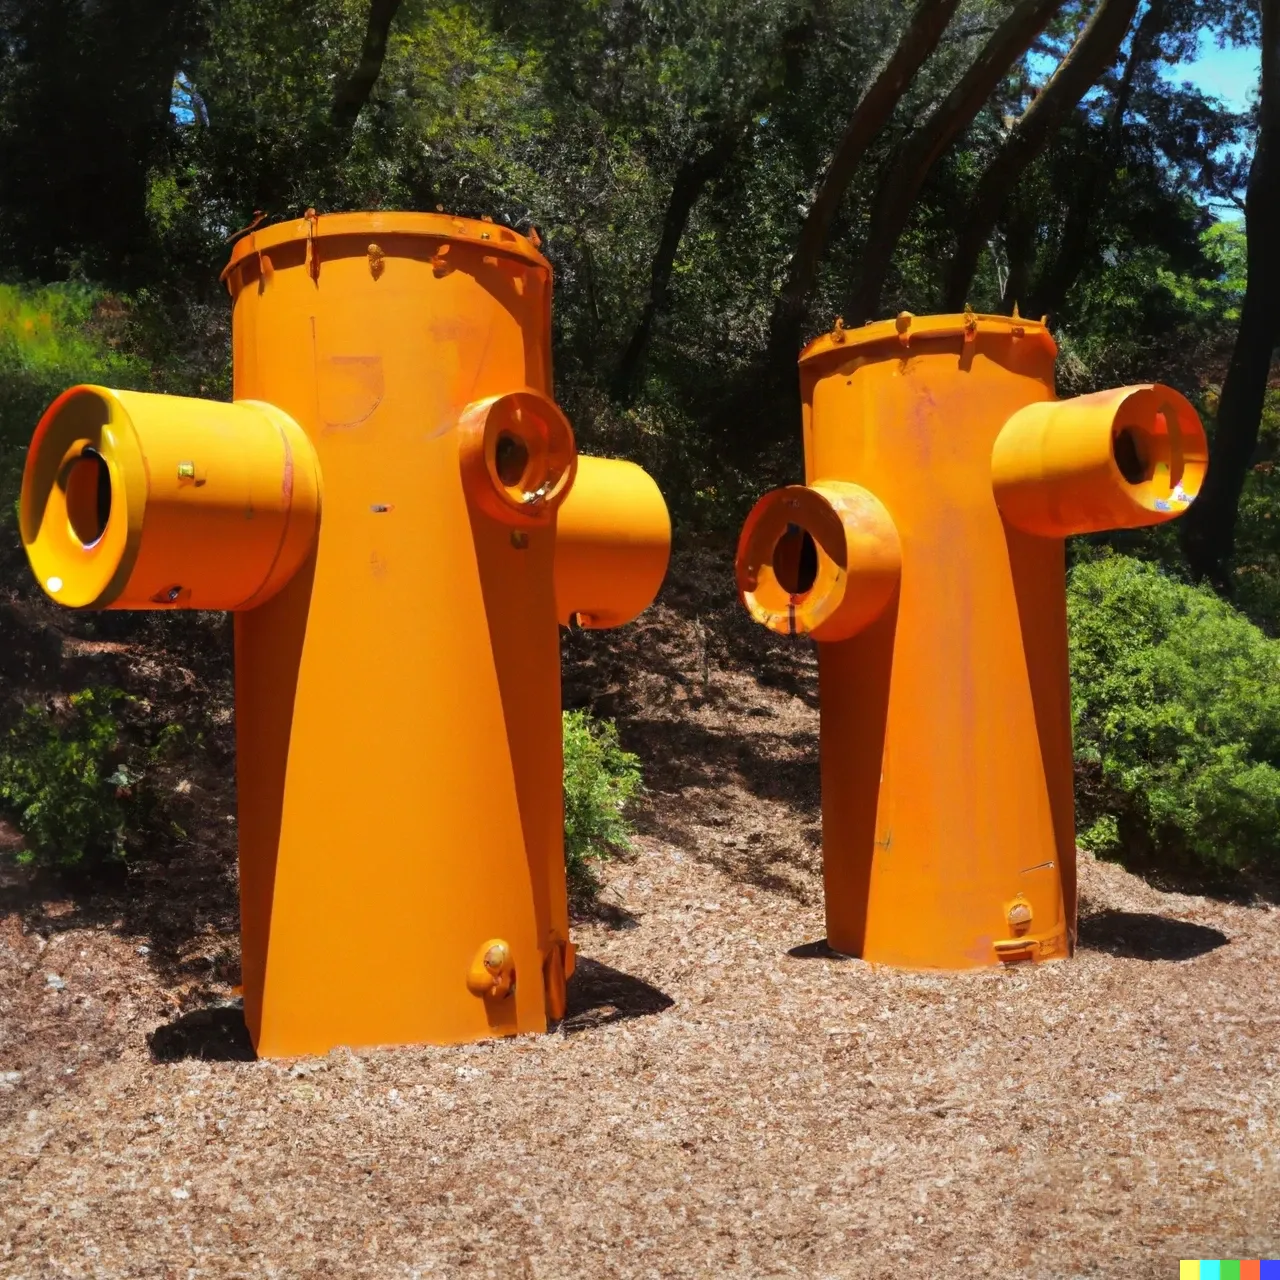 A sculpture that provides bulkwater supply to wildfire appliances.